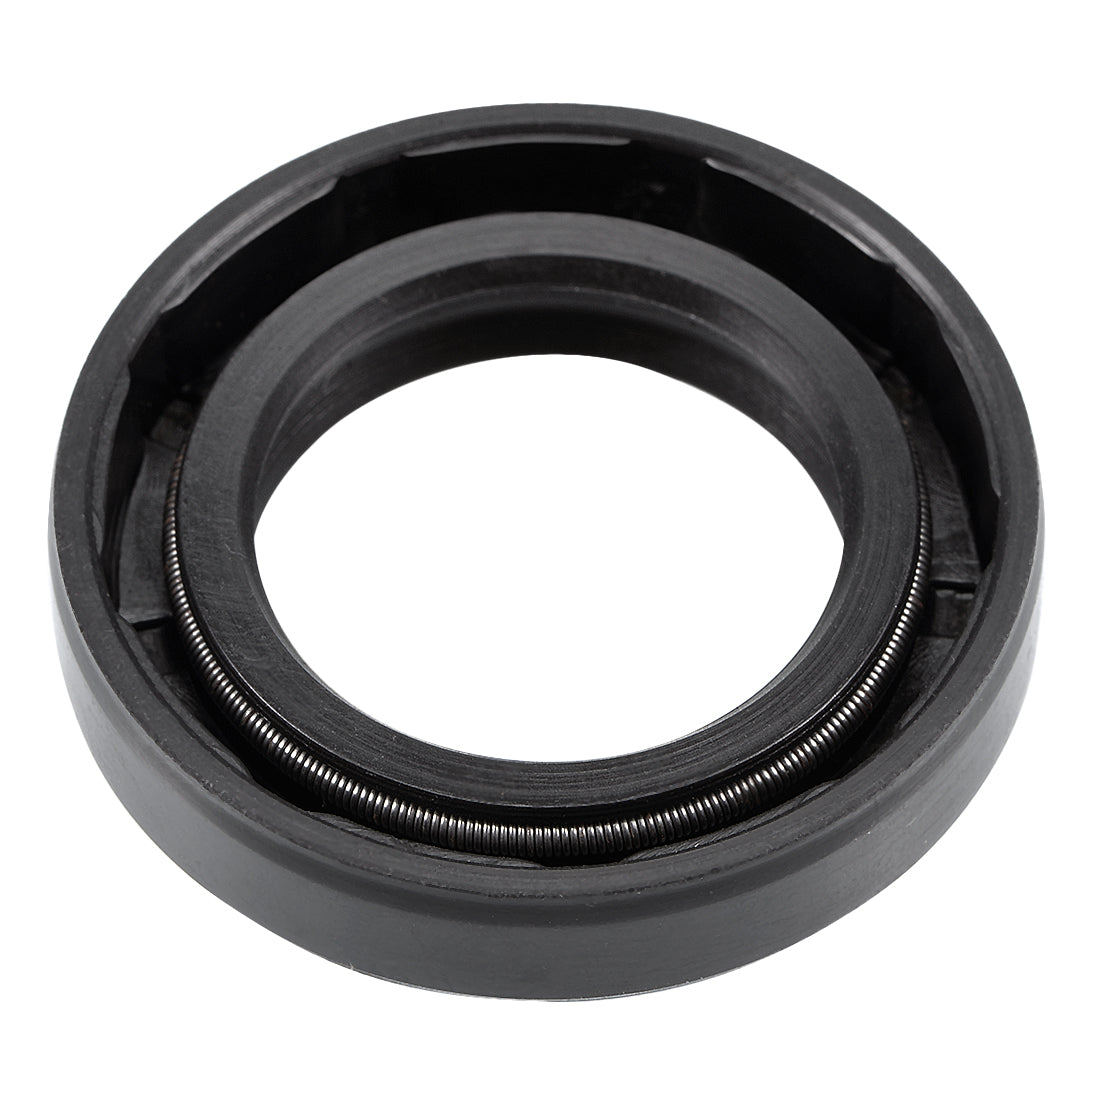 Uxcell Uxcell Oil Seal, TC 24mm x 45mm x 7mm, Nitrile Rubber Cover Double Lip